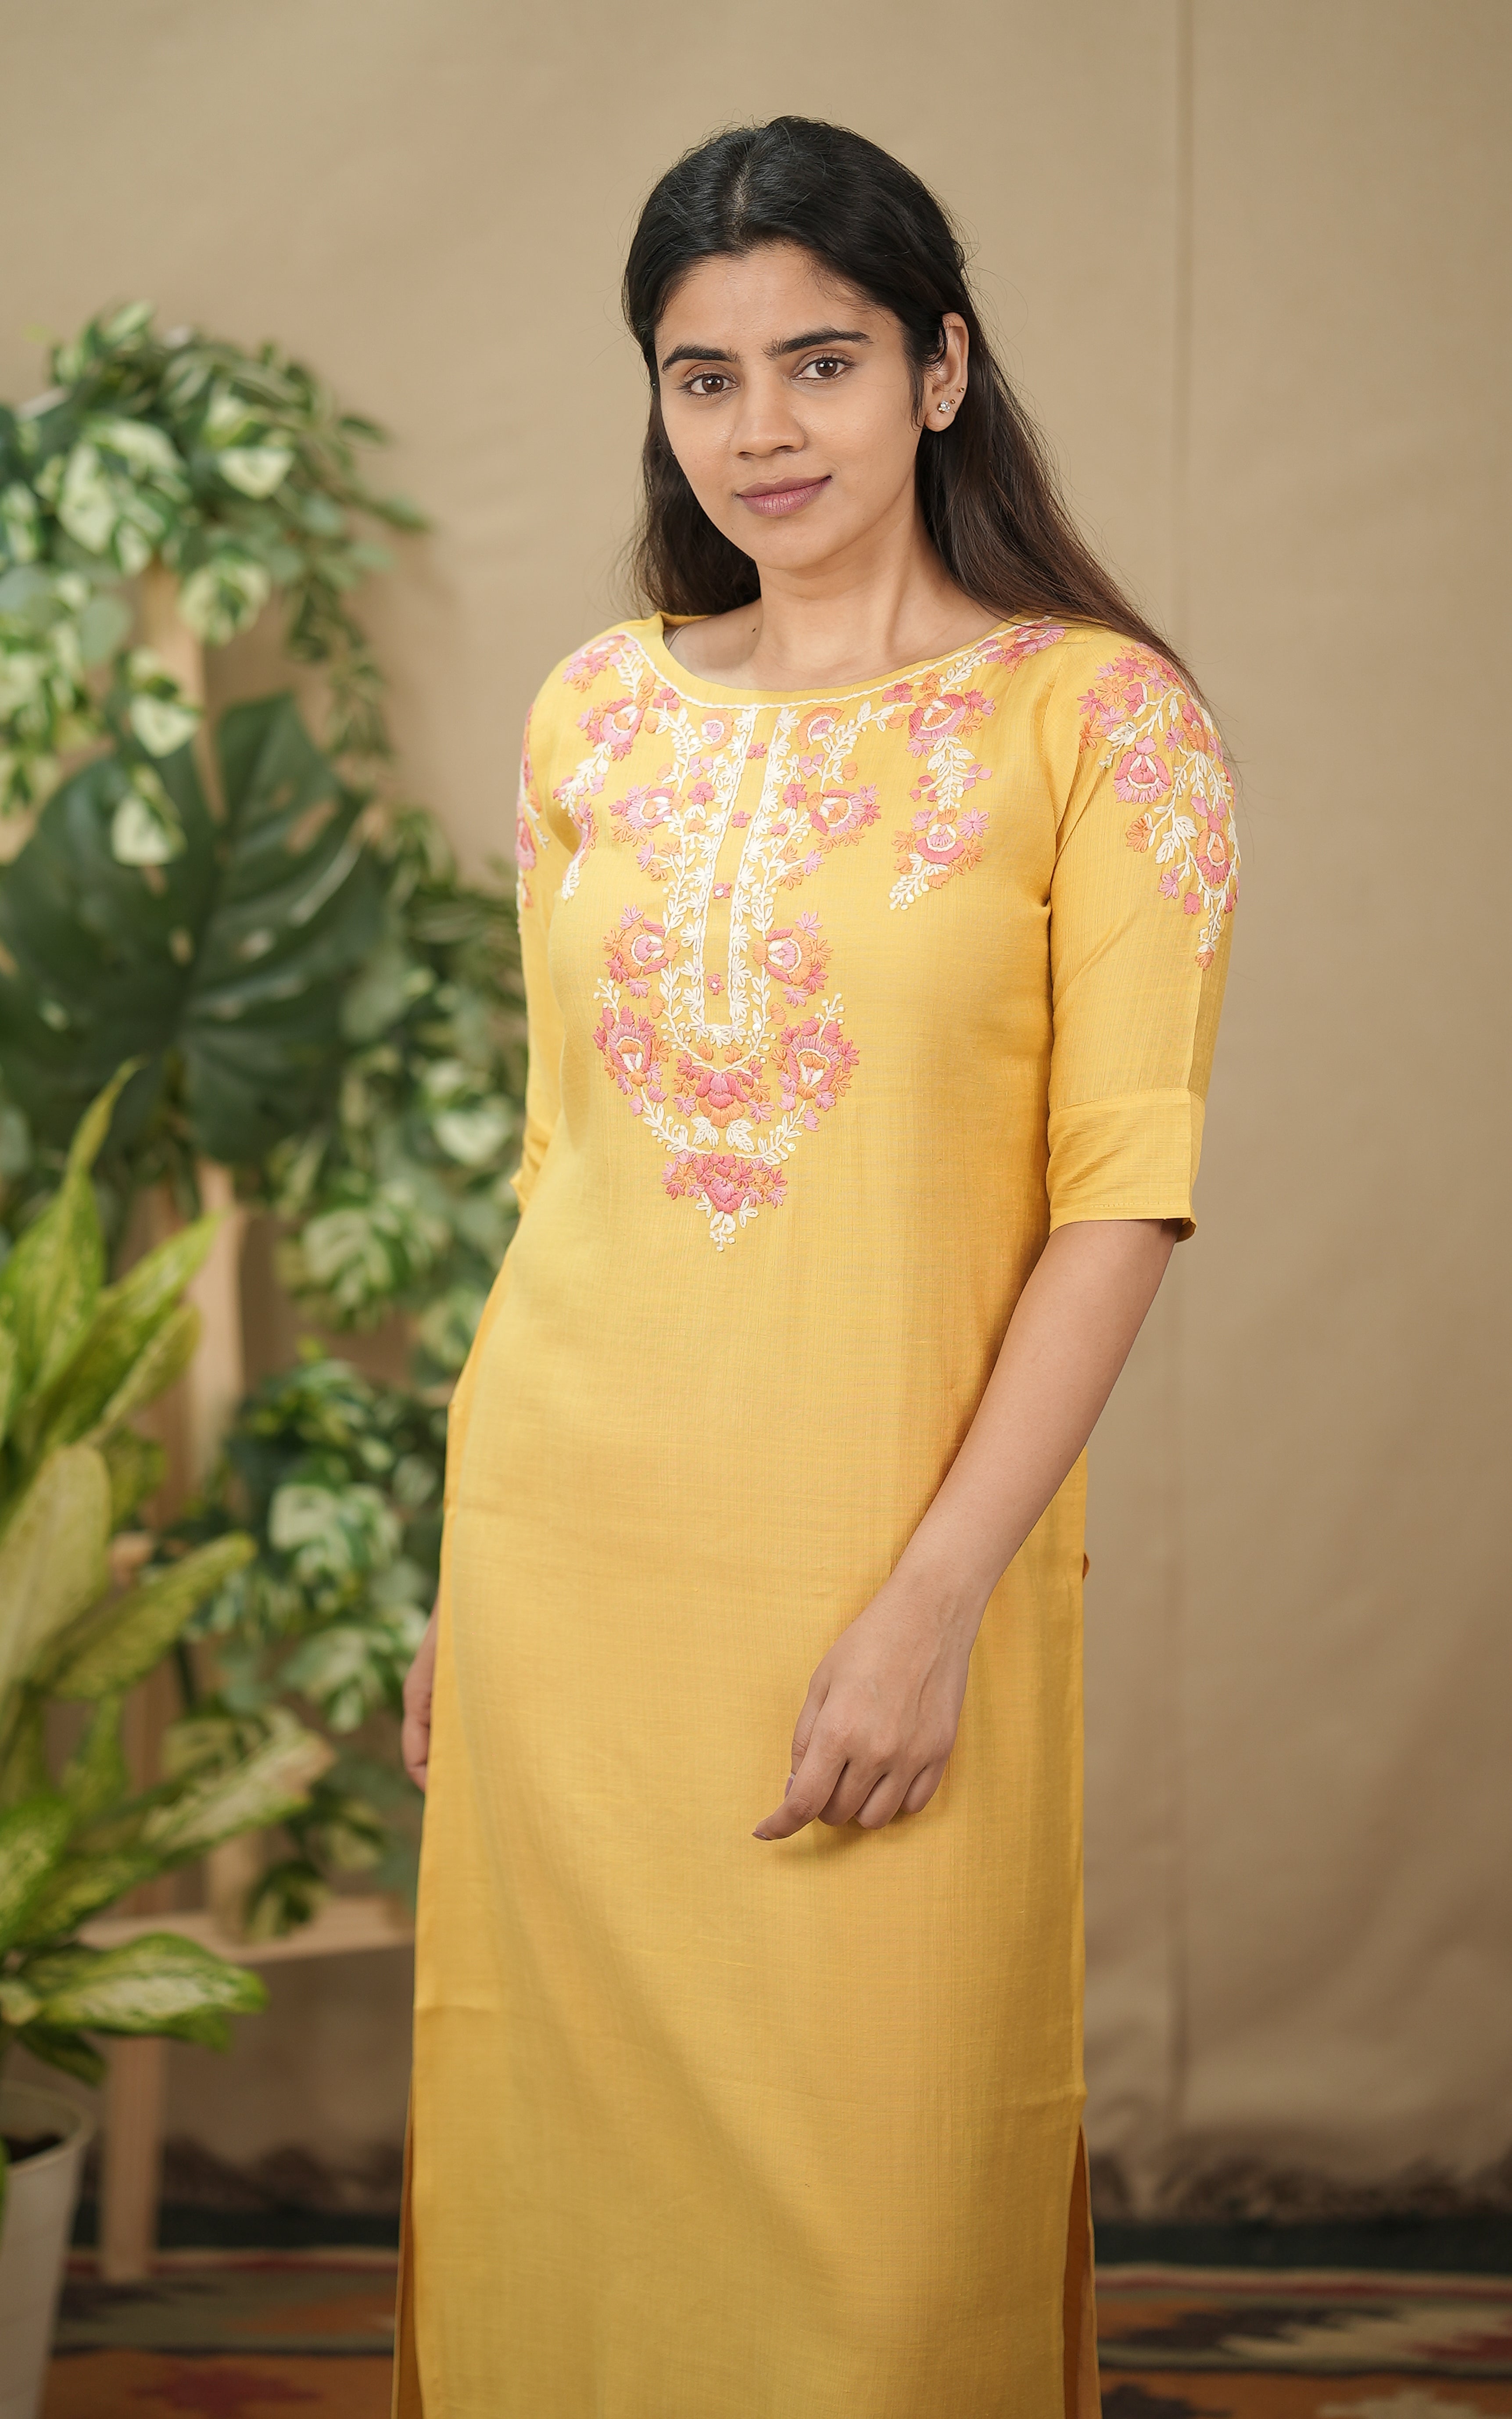 instore kurti office wear for women straight cut cotton blend, embroidered front yoke yellow color kurti 